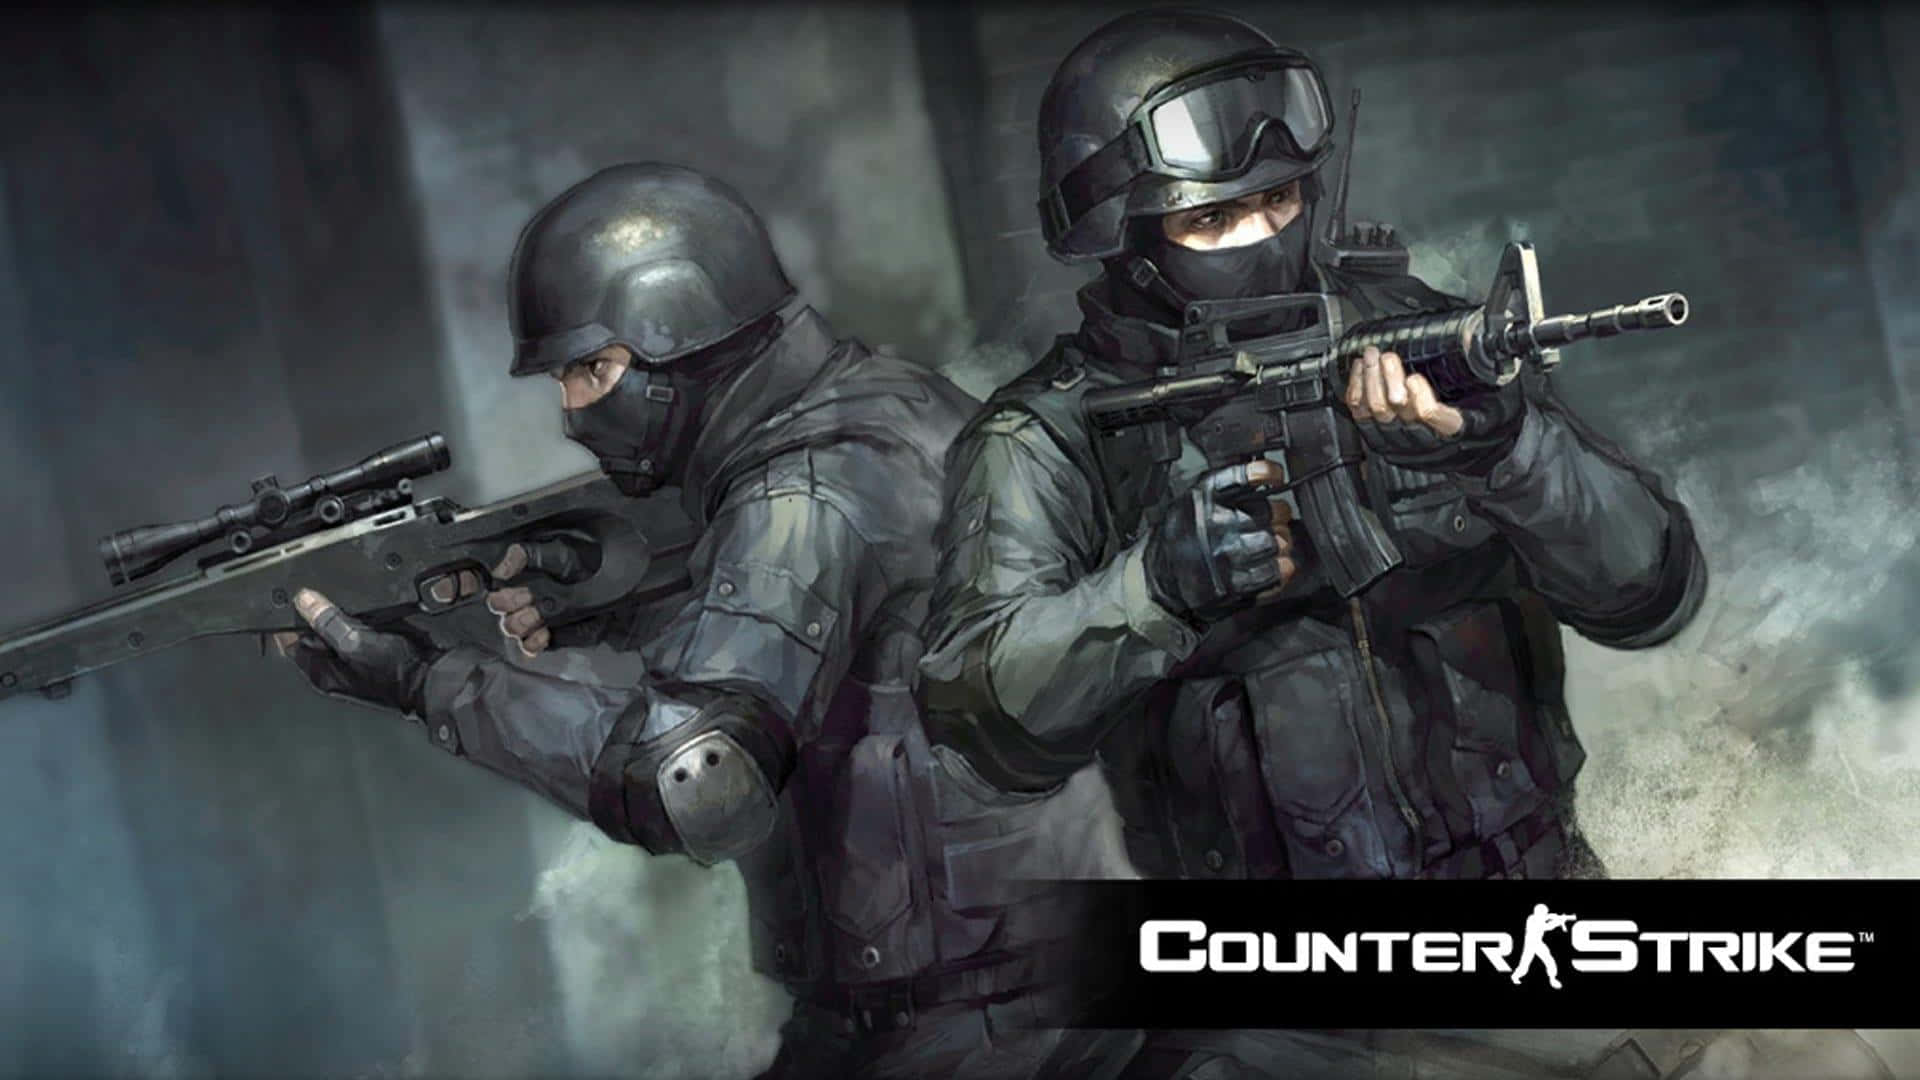 Official Counterstrike Two Poster Wallpaper